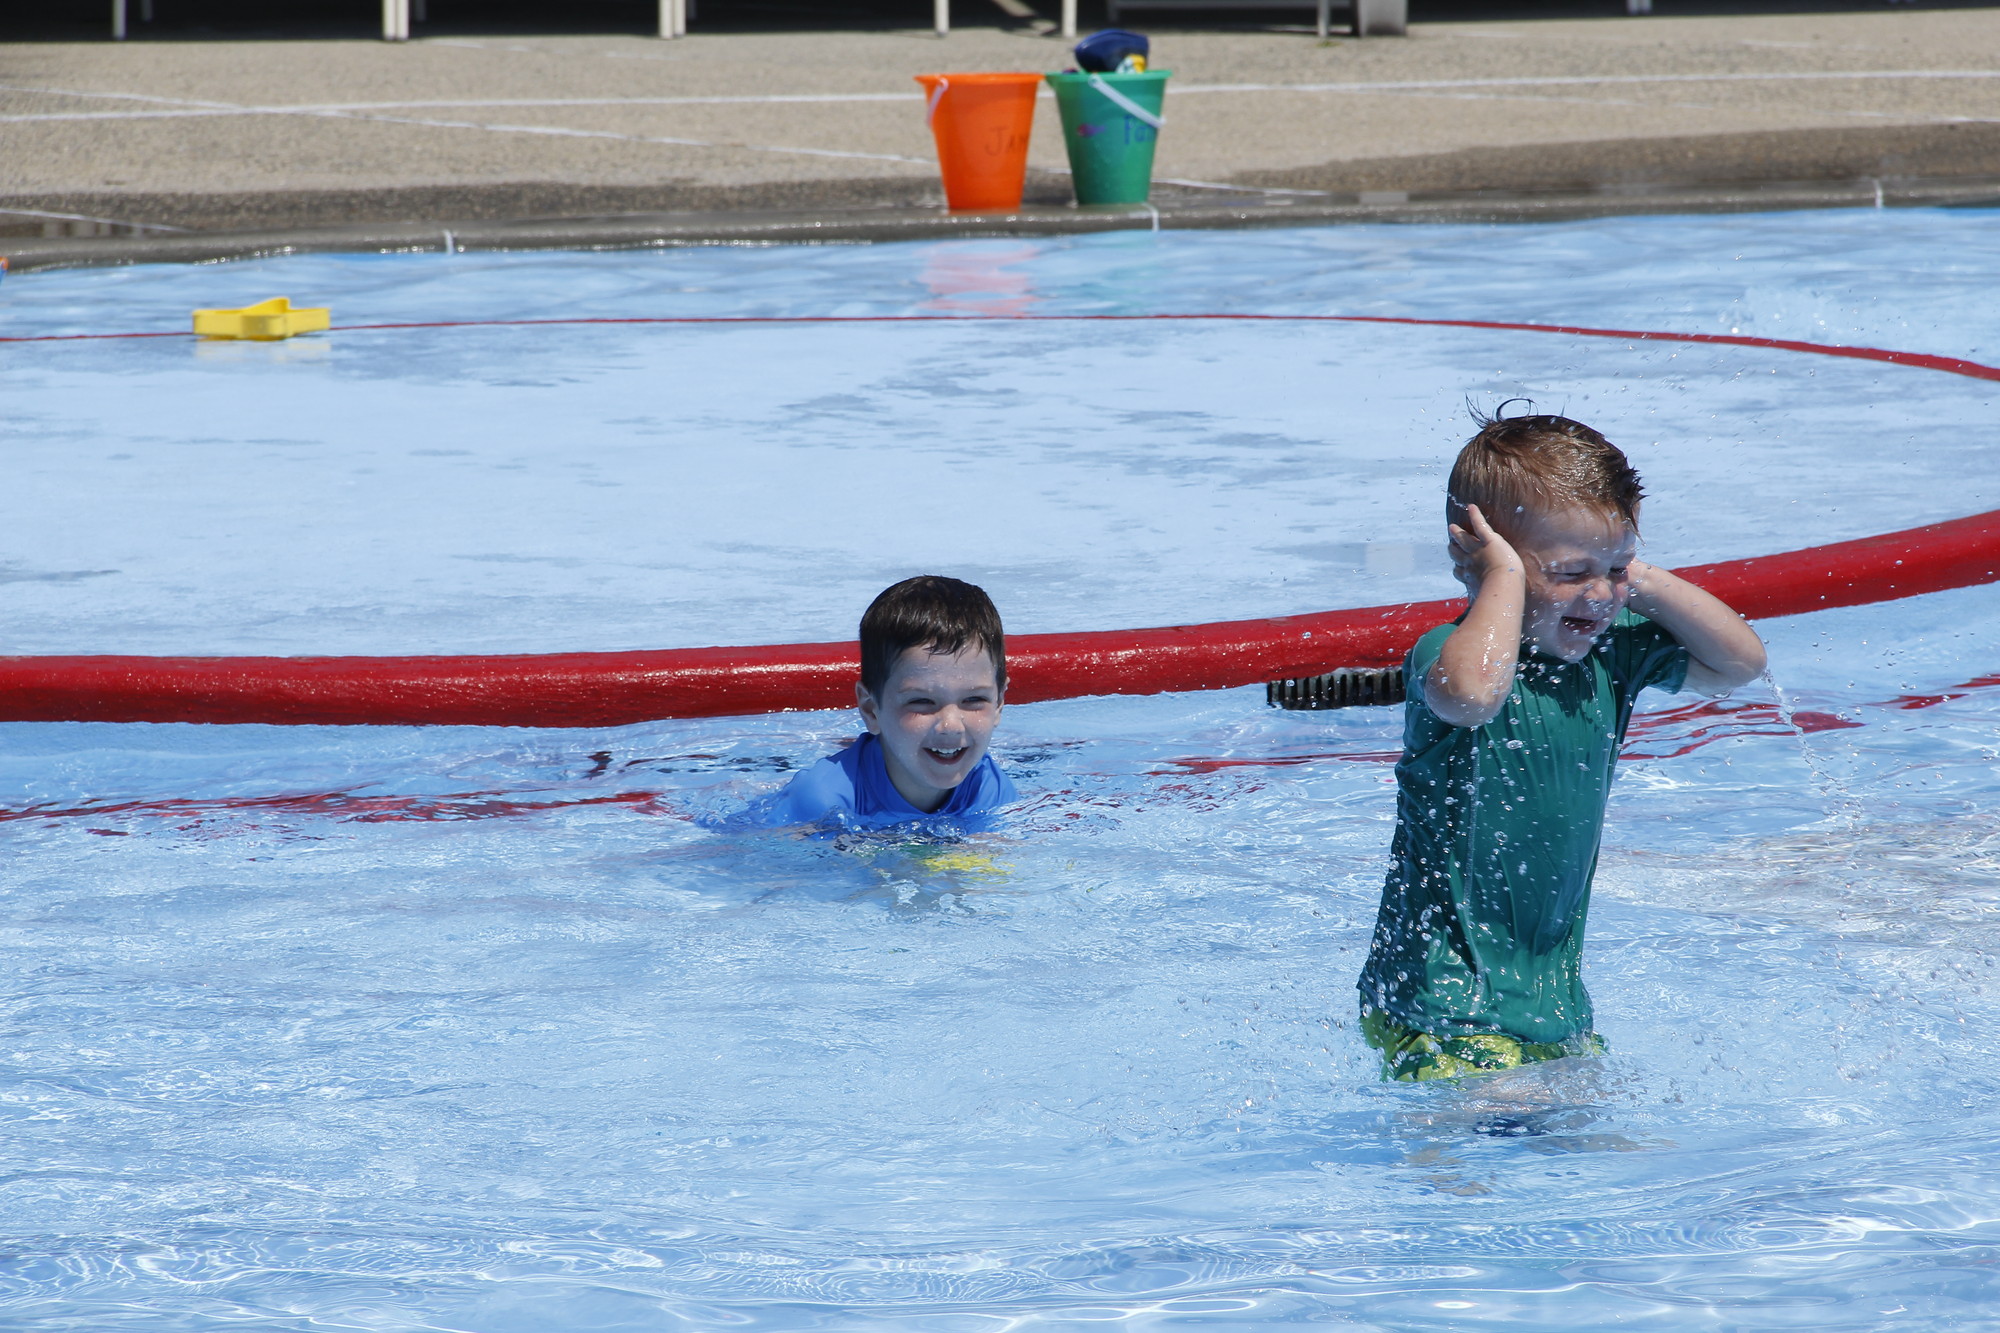 James Wisniewski, 5, and his brother Patrick, 3, had a great time splashing around in the pool at Veterans Memorial Park.